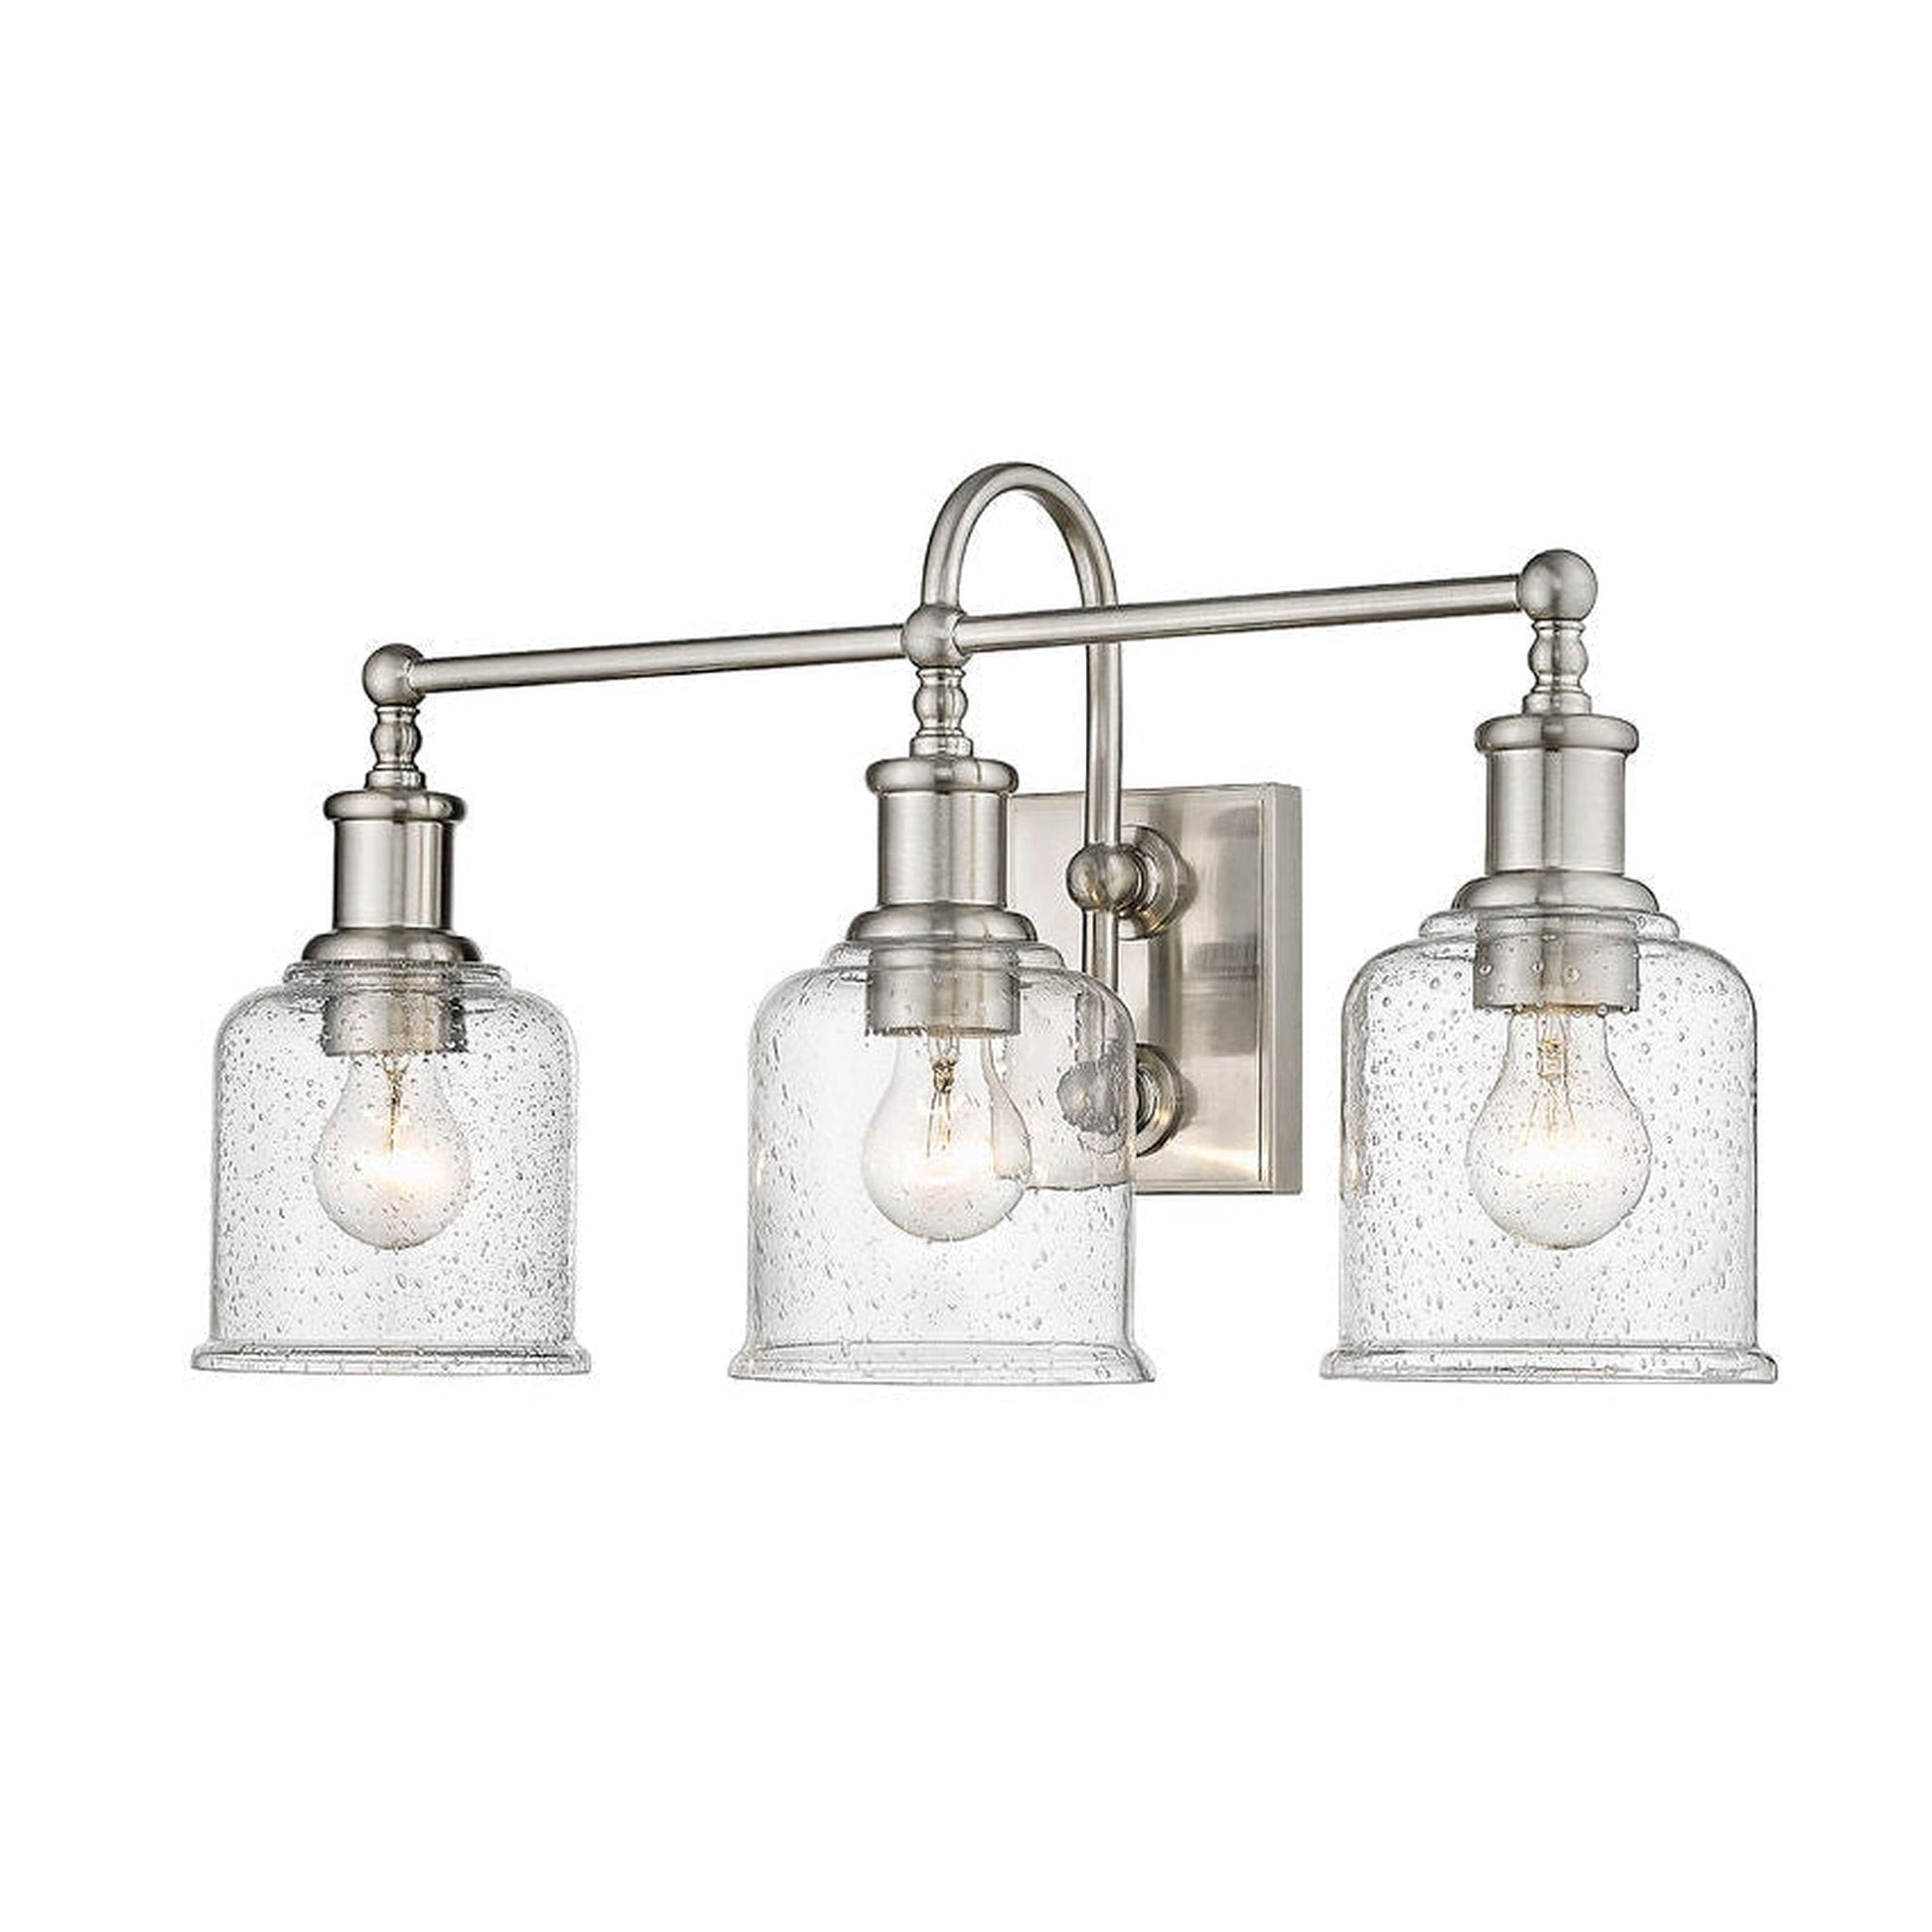 Z-Lite Bryant 24" 3-Light Brushed Nickel Vanity Light With Clear Seedy Glass Shade